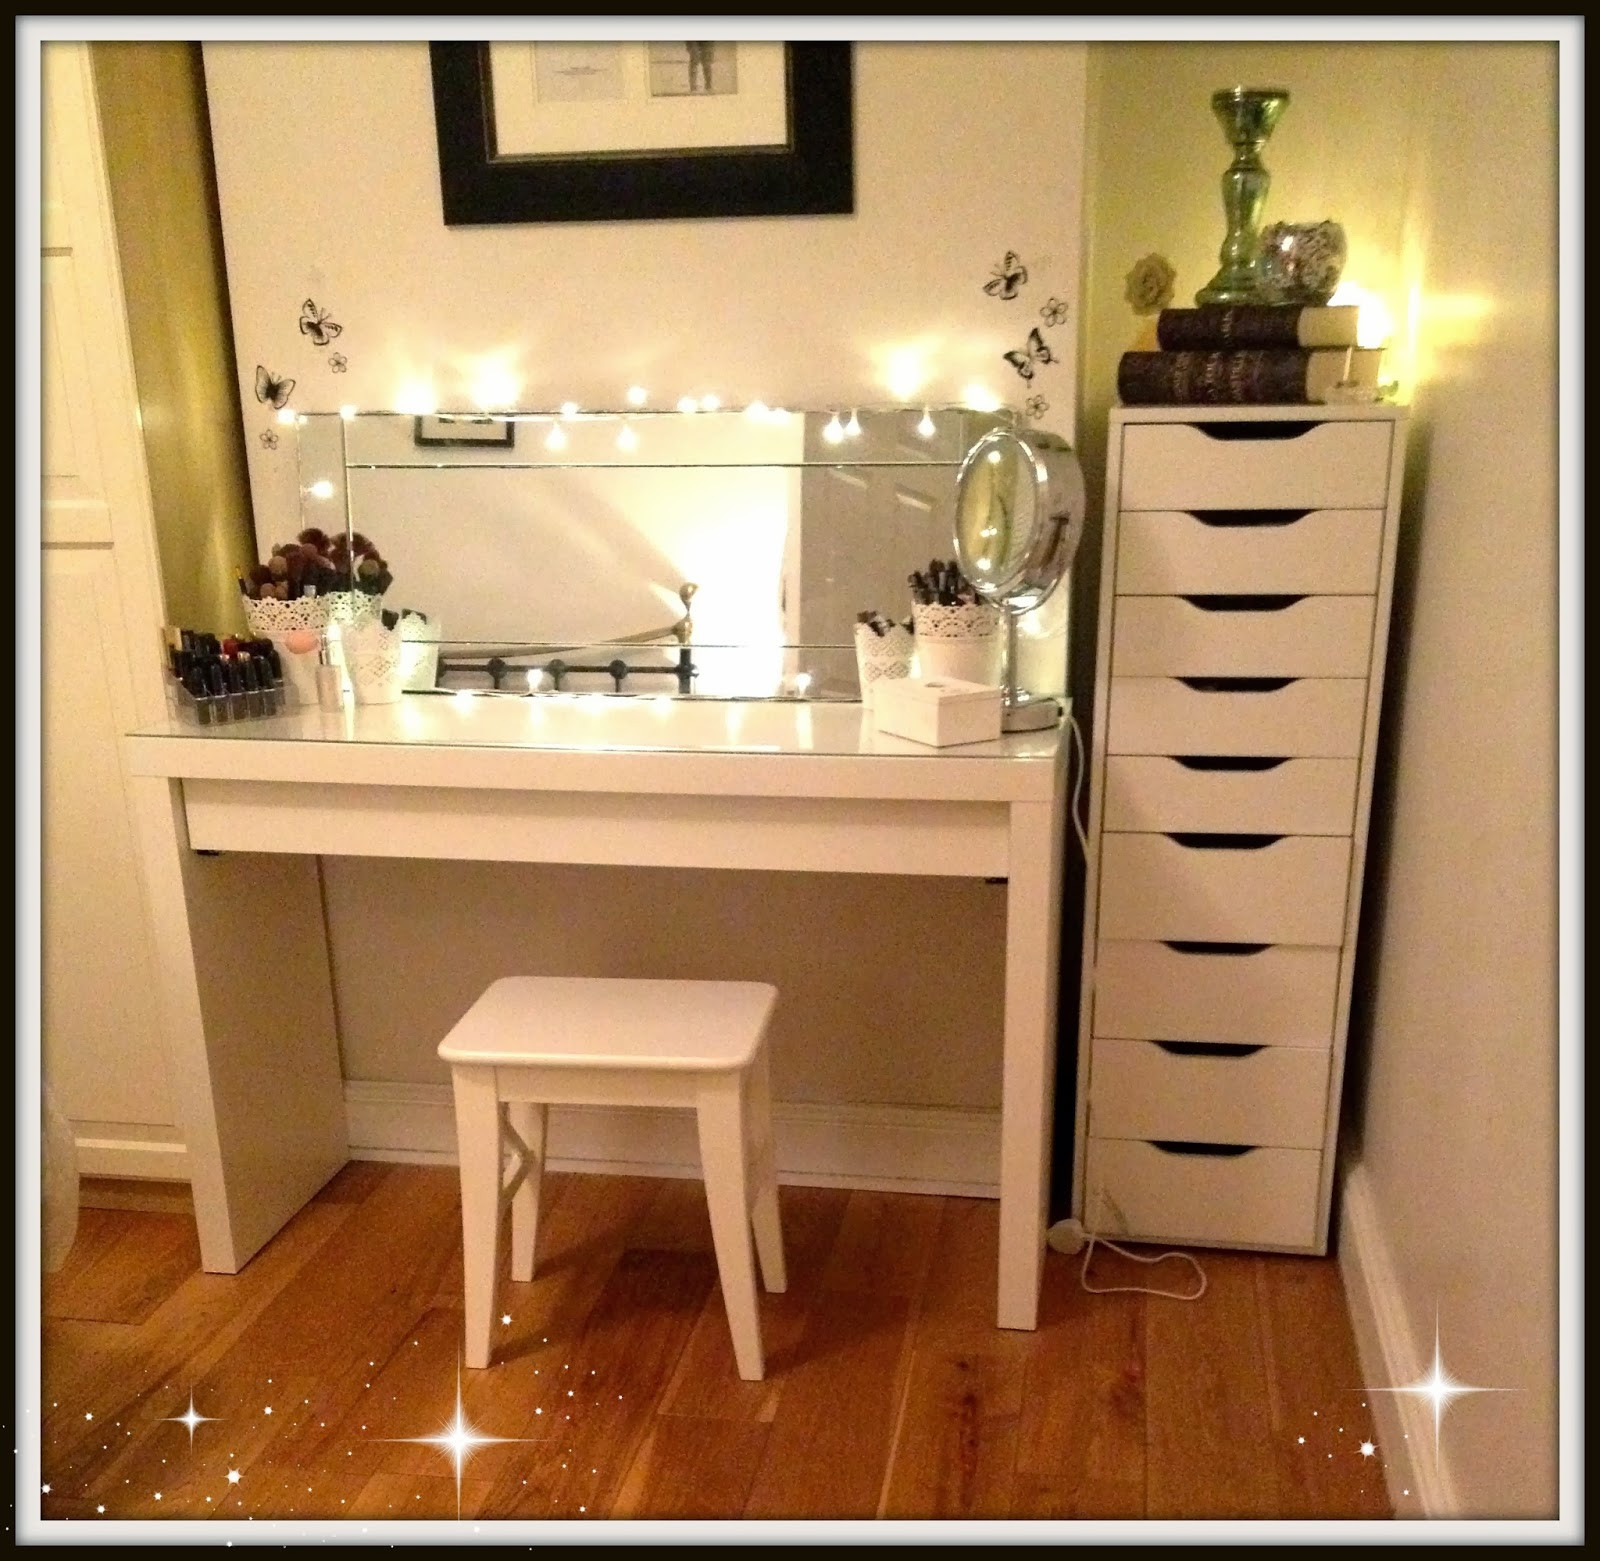 Bedroom Makeup Vanity With Lights
 Tips Exciting Vanity Desk With Lights To Relax During